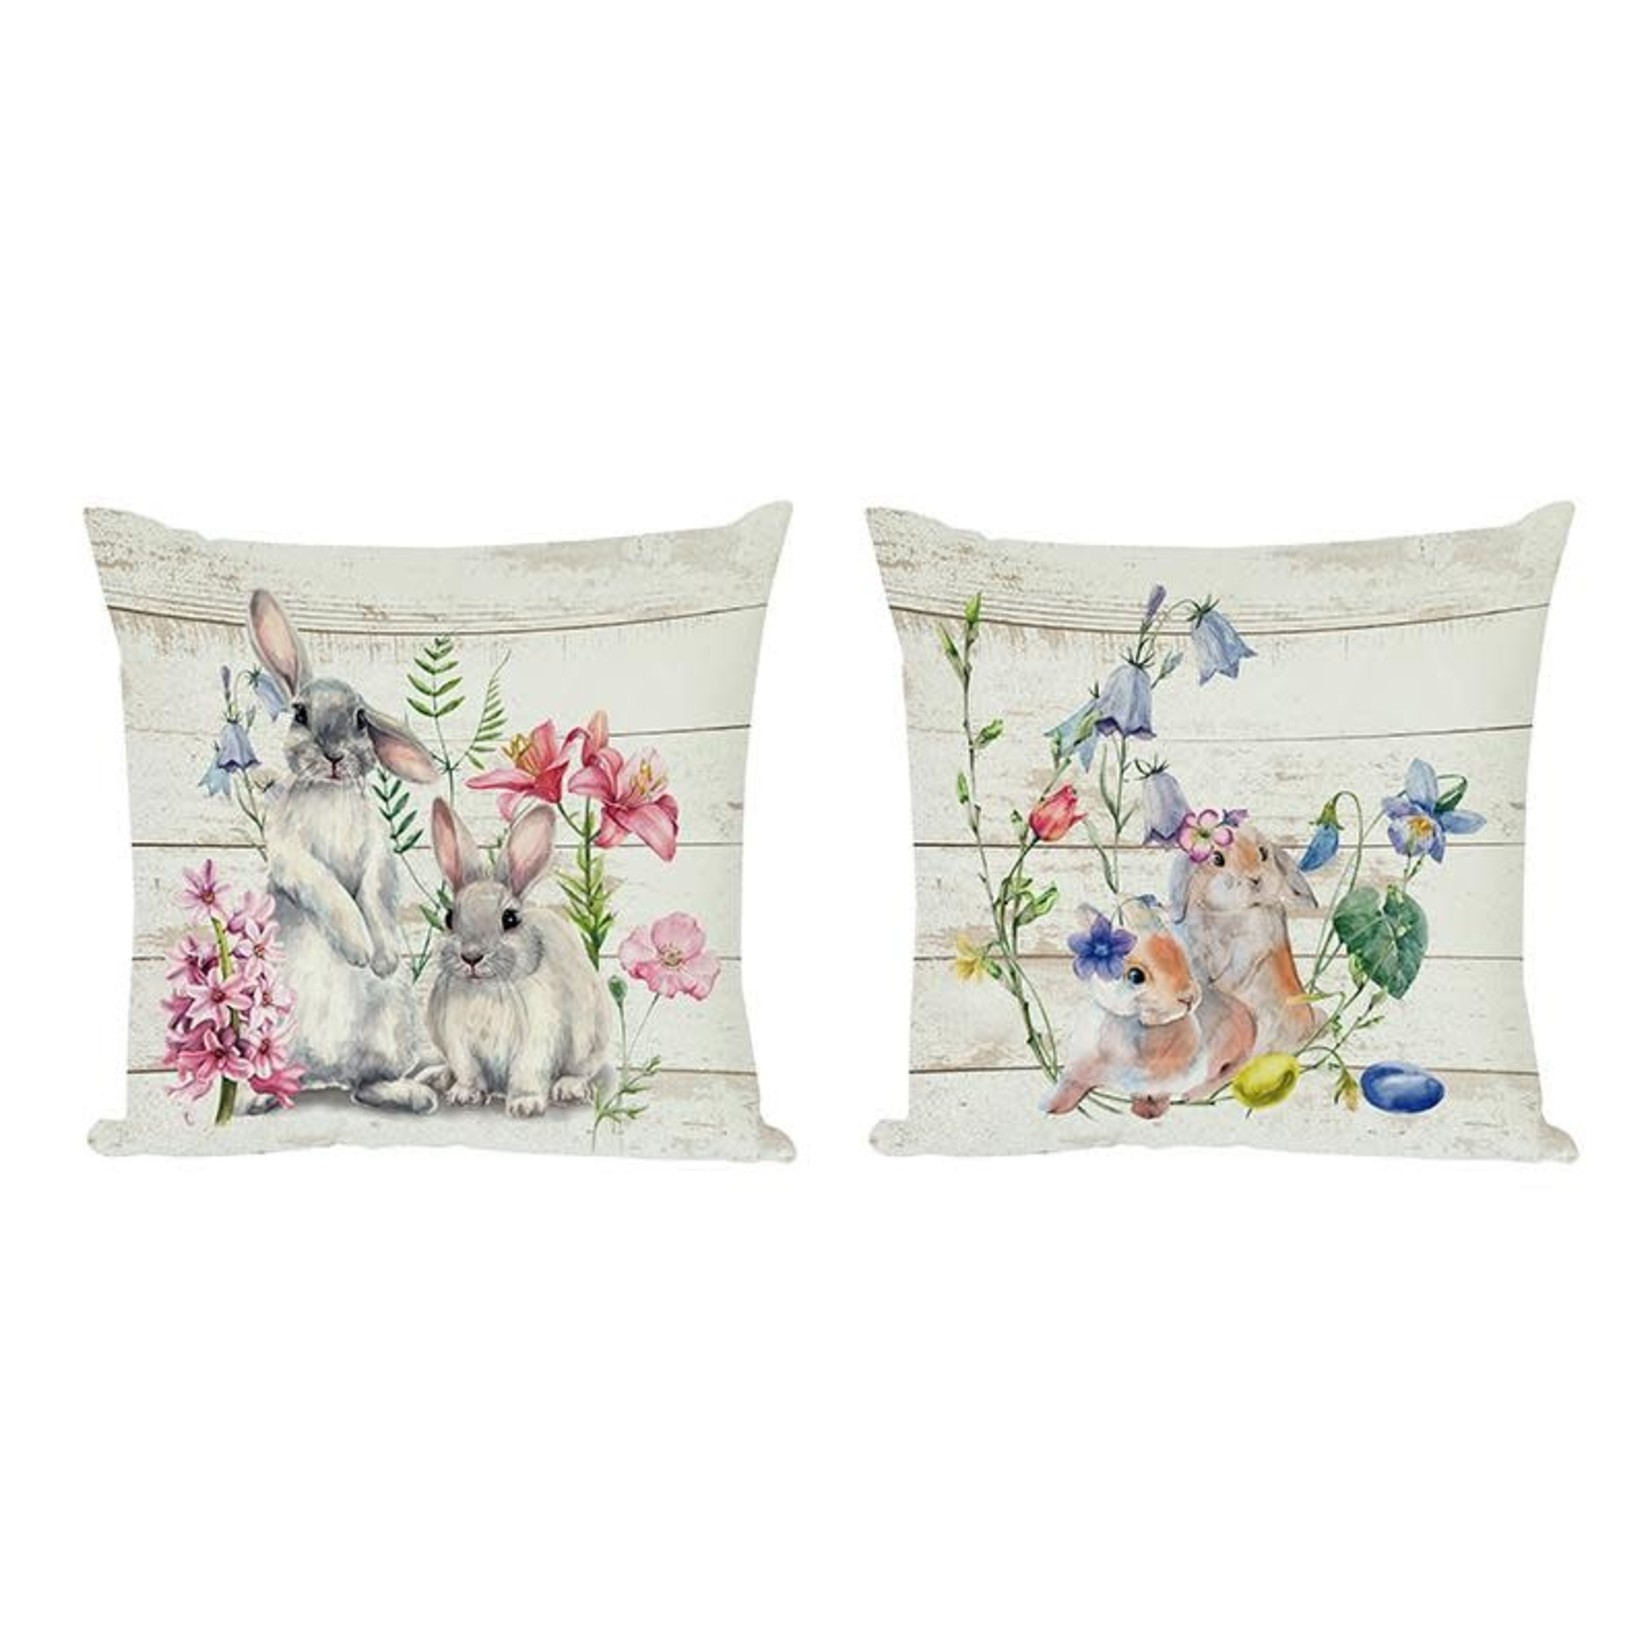 Spring pillows - 2 Assorted